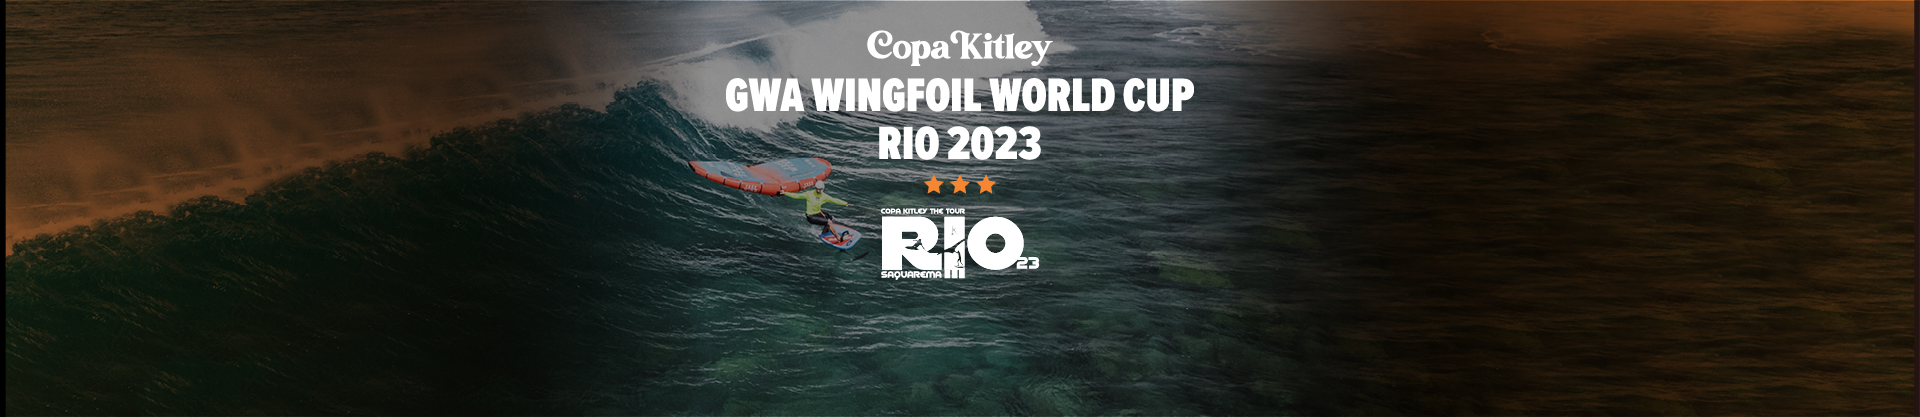 Image for GWA Wingfoil World Cup Brazil 2023